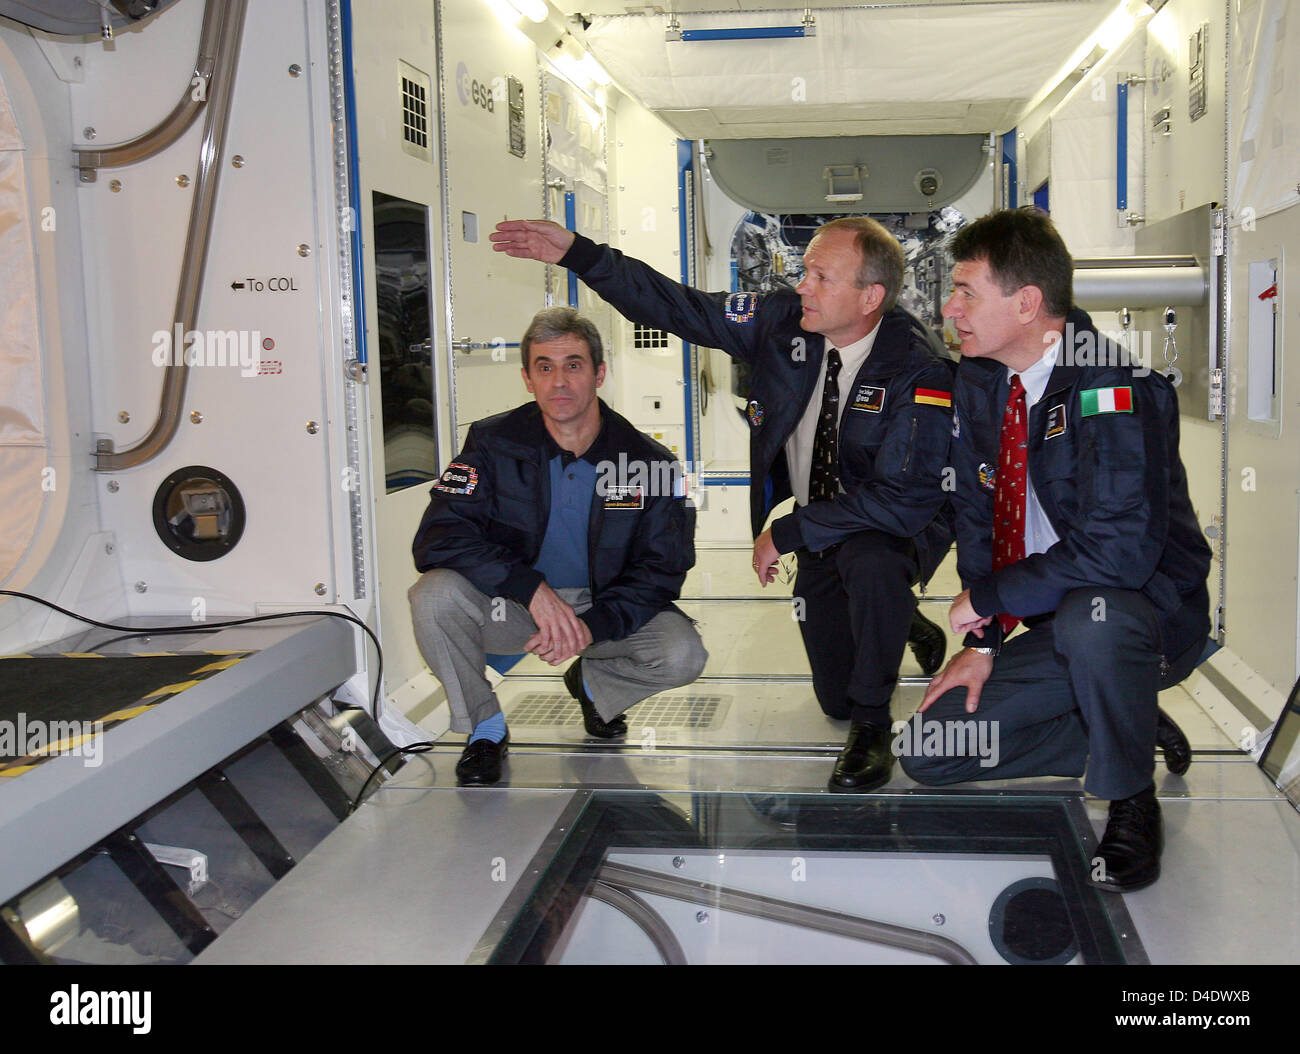 Astronauts of the European Space Agency ESA (L-R) Leopold Eyharts of France, Hans Schlegel of Germany and Paolo Nespoli of Italy pose inside a model of the Columbus laboratory in Cologne, Germany, 29 April 2008. ESA and the German Aerospace Centre (DLR) currently campaign for the next generation of astronauts. Photo: OLIVER BERG Stock Photo